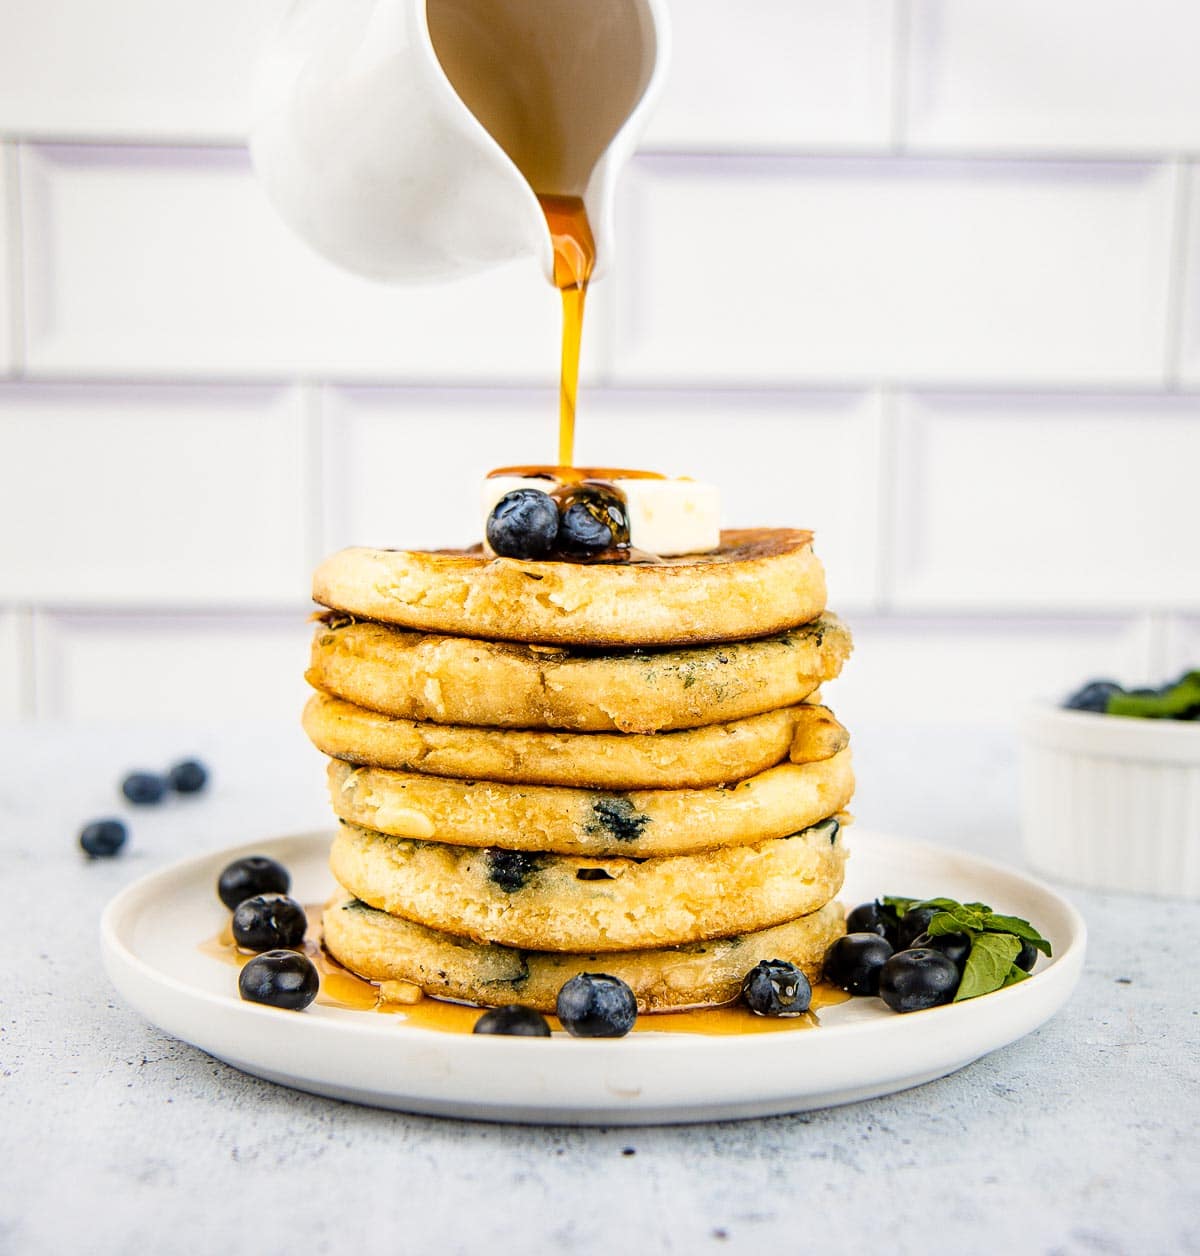 Maple syrup being poured on to a stack of blueberry buttermilk pancakes.